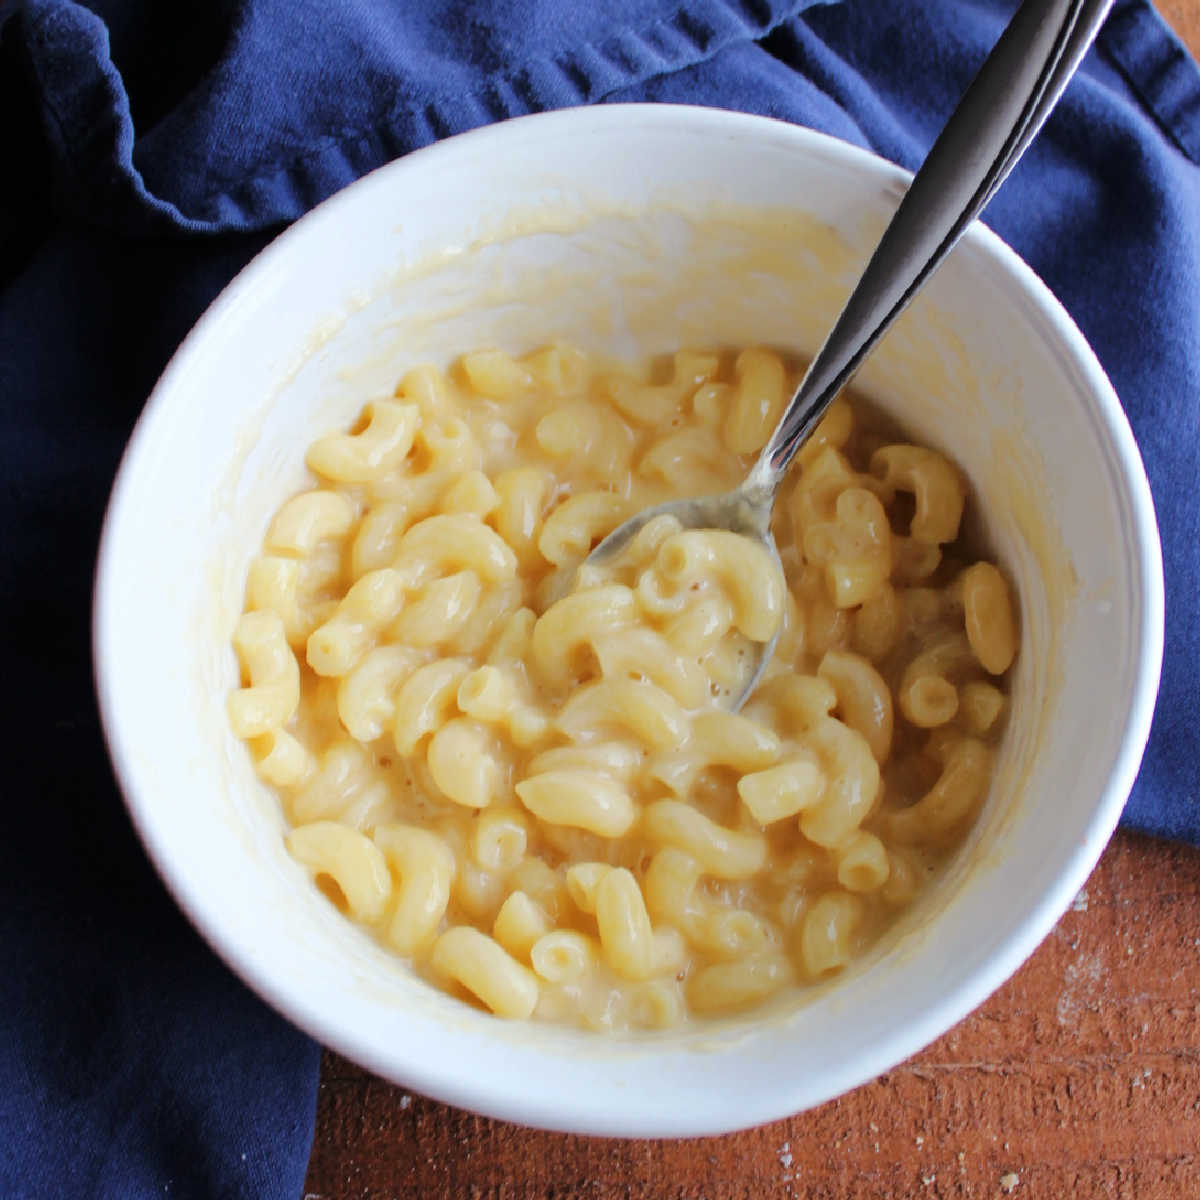 Bowl of easy single serve macaroni and cheese ready to eat.